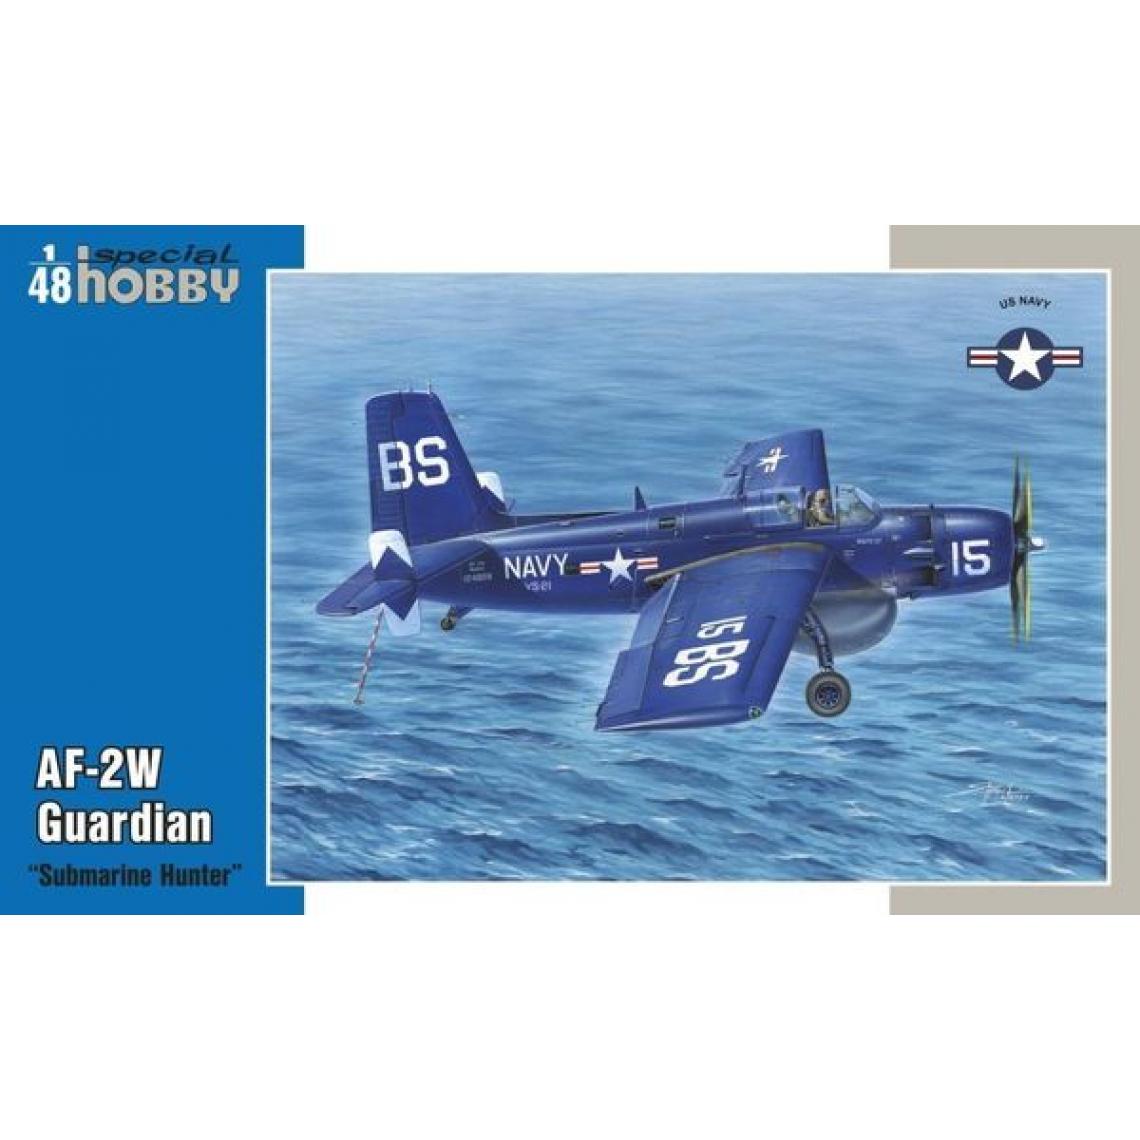 Special Hobby - AF-2W Guardian "Submarine Hunter" - 1:48e - Special Hobby - Accessoires et pièces